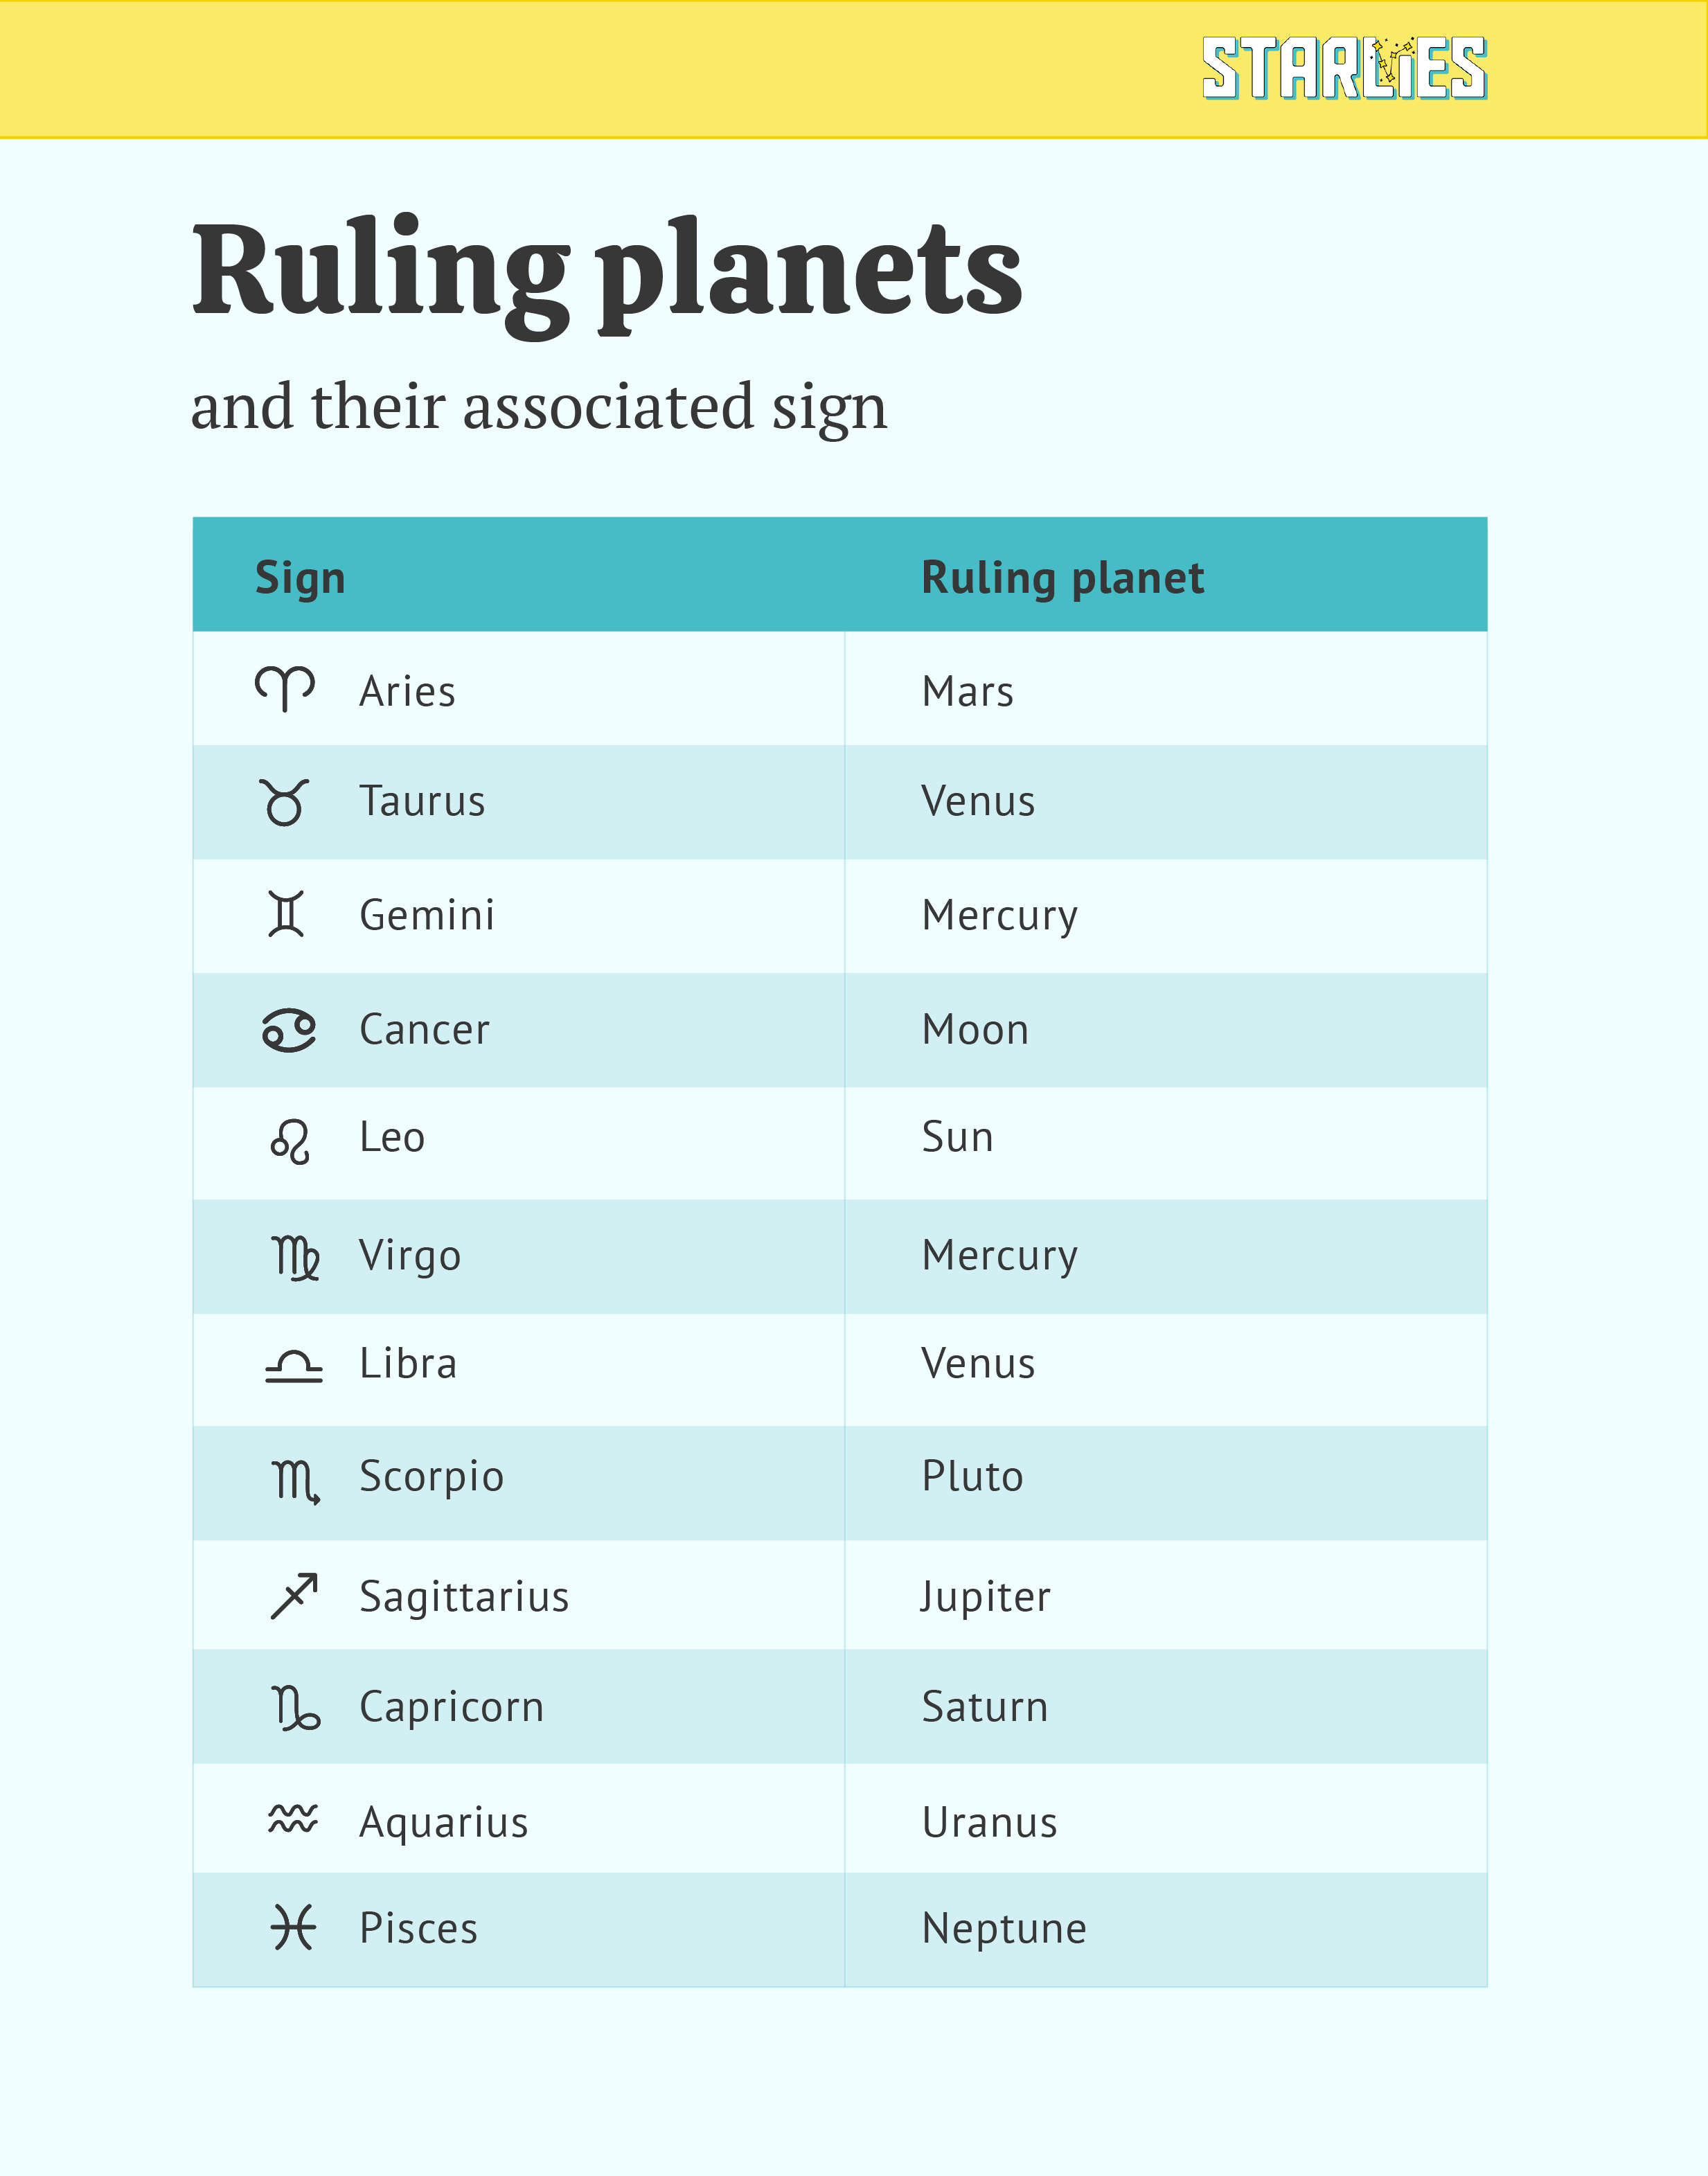 Chart of signs and ruling planets